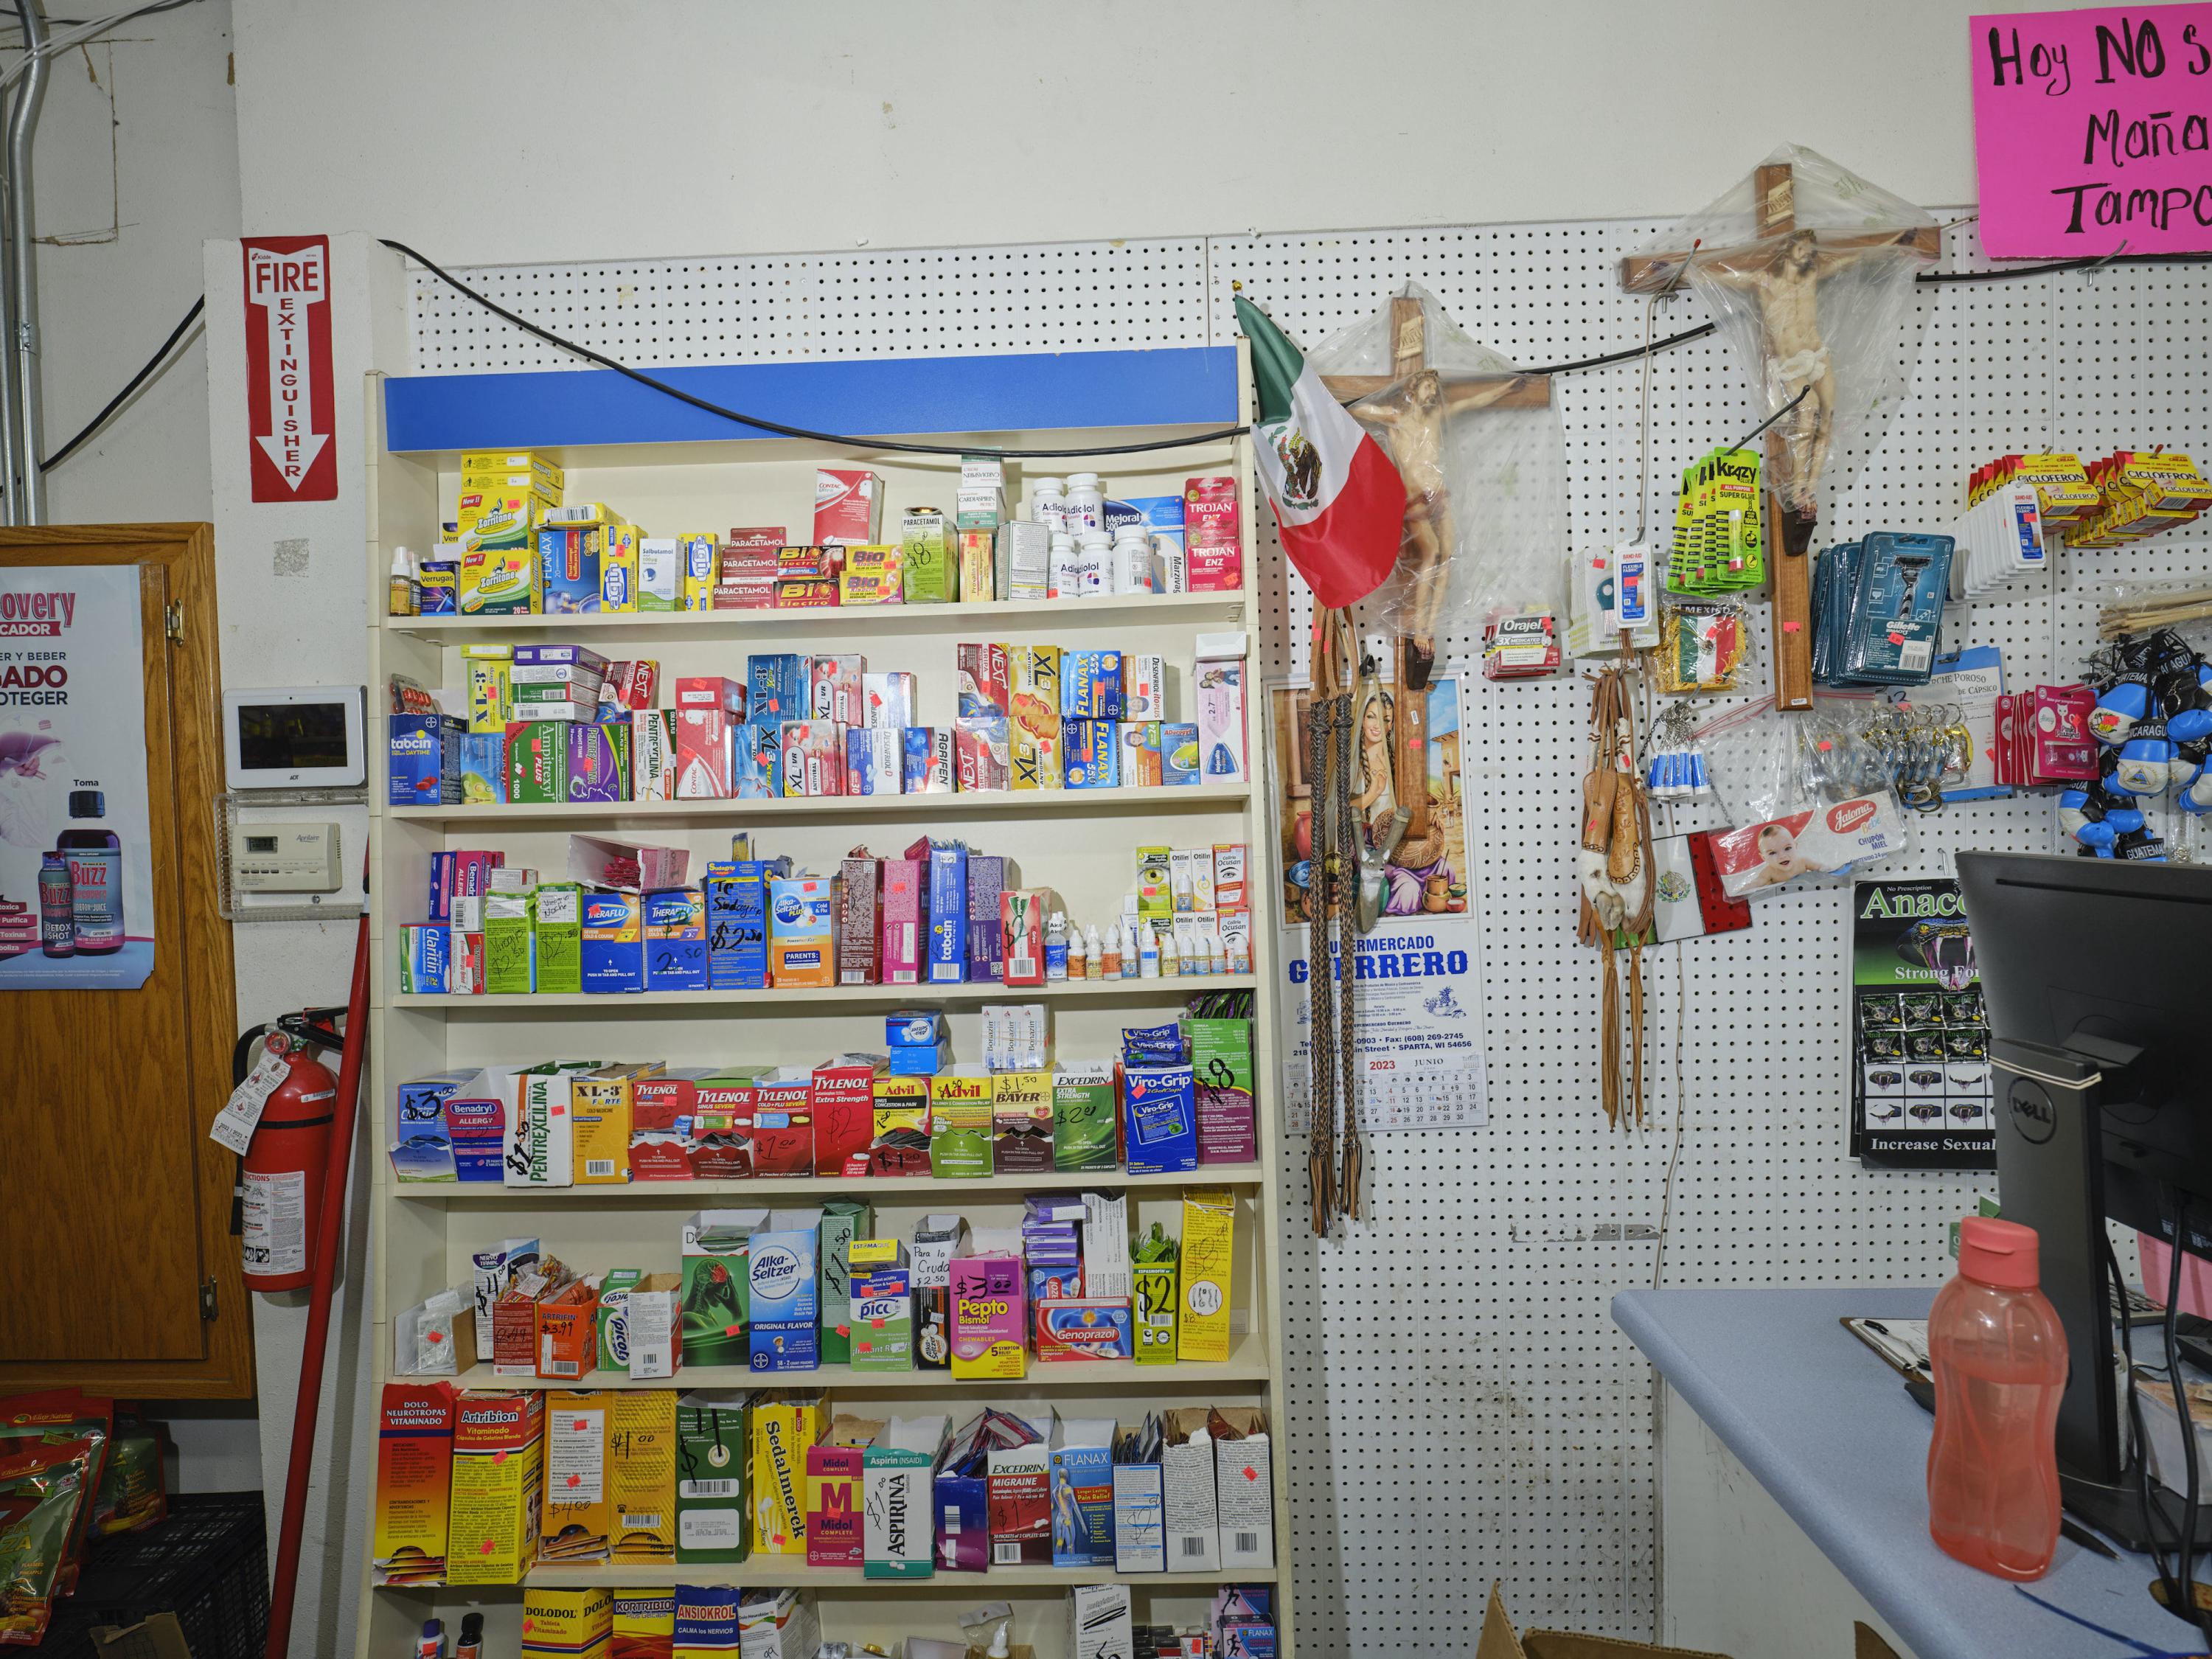 Immigrant dairy workers from around Sparta, Wisconsin, regularly visit Supermercado Guerrero to buy groceries and painkillers, cash their checks and wire money to relatives in Mexico and Central America. Caleb Santiago Alvarado for ProPublica